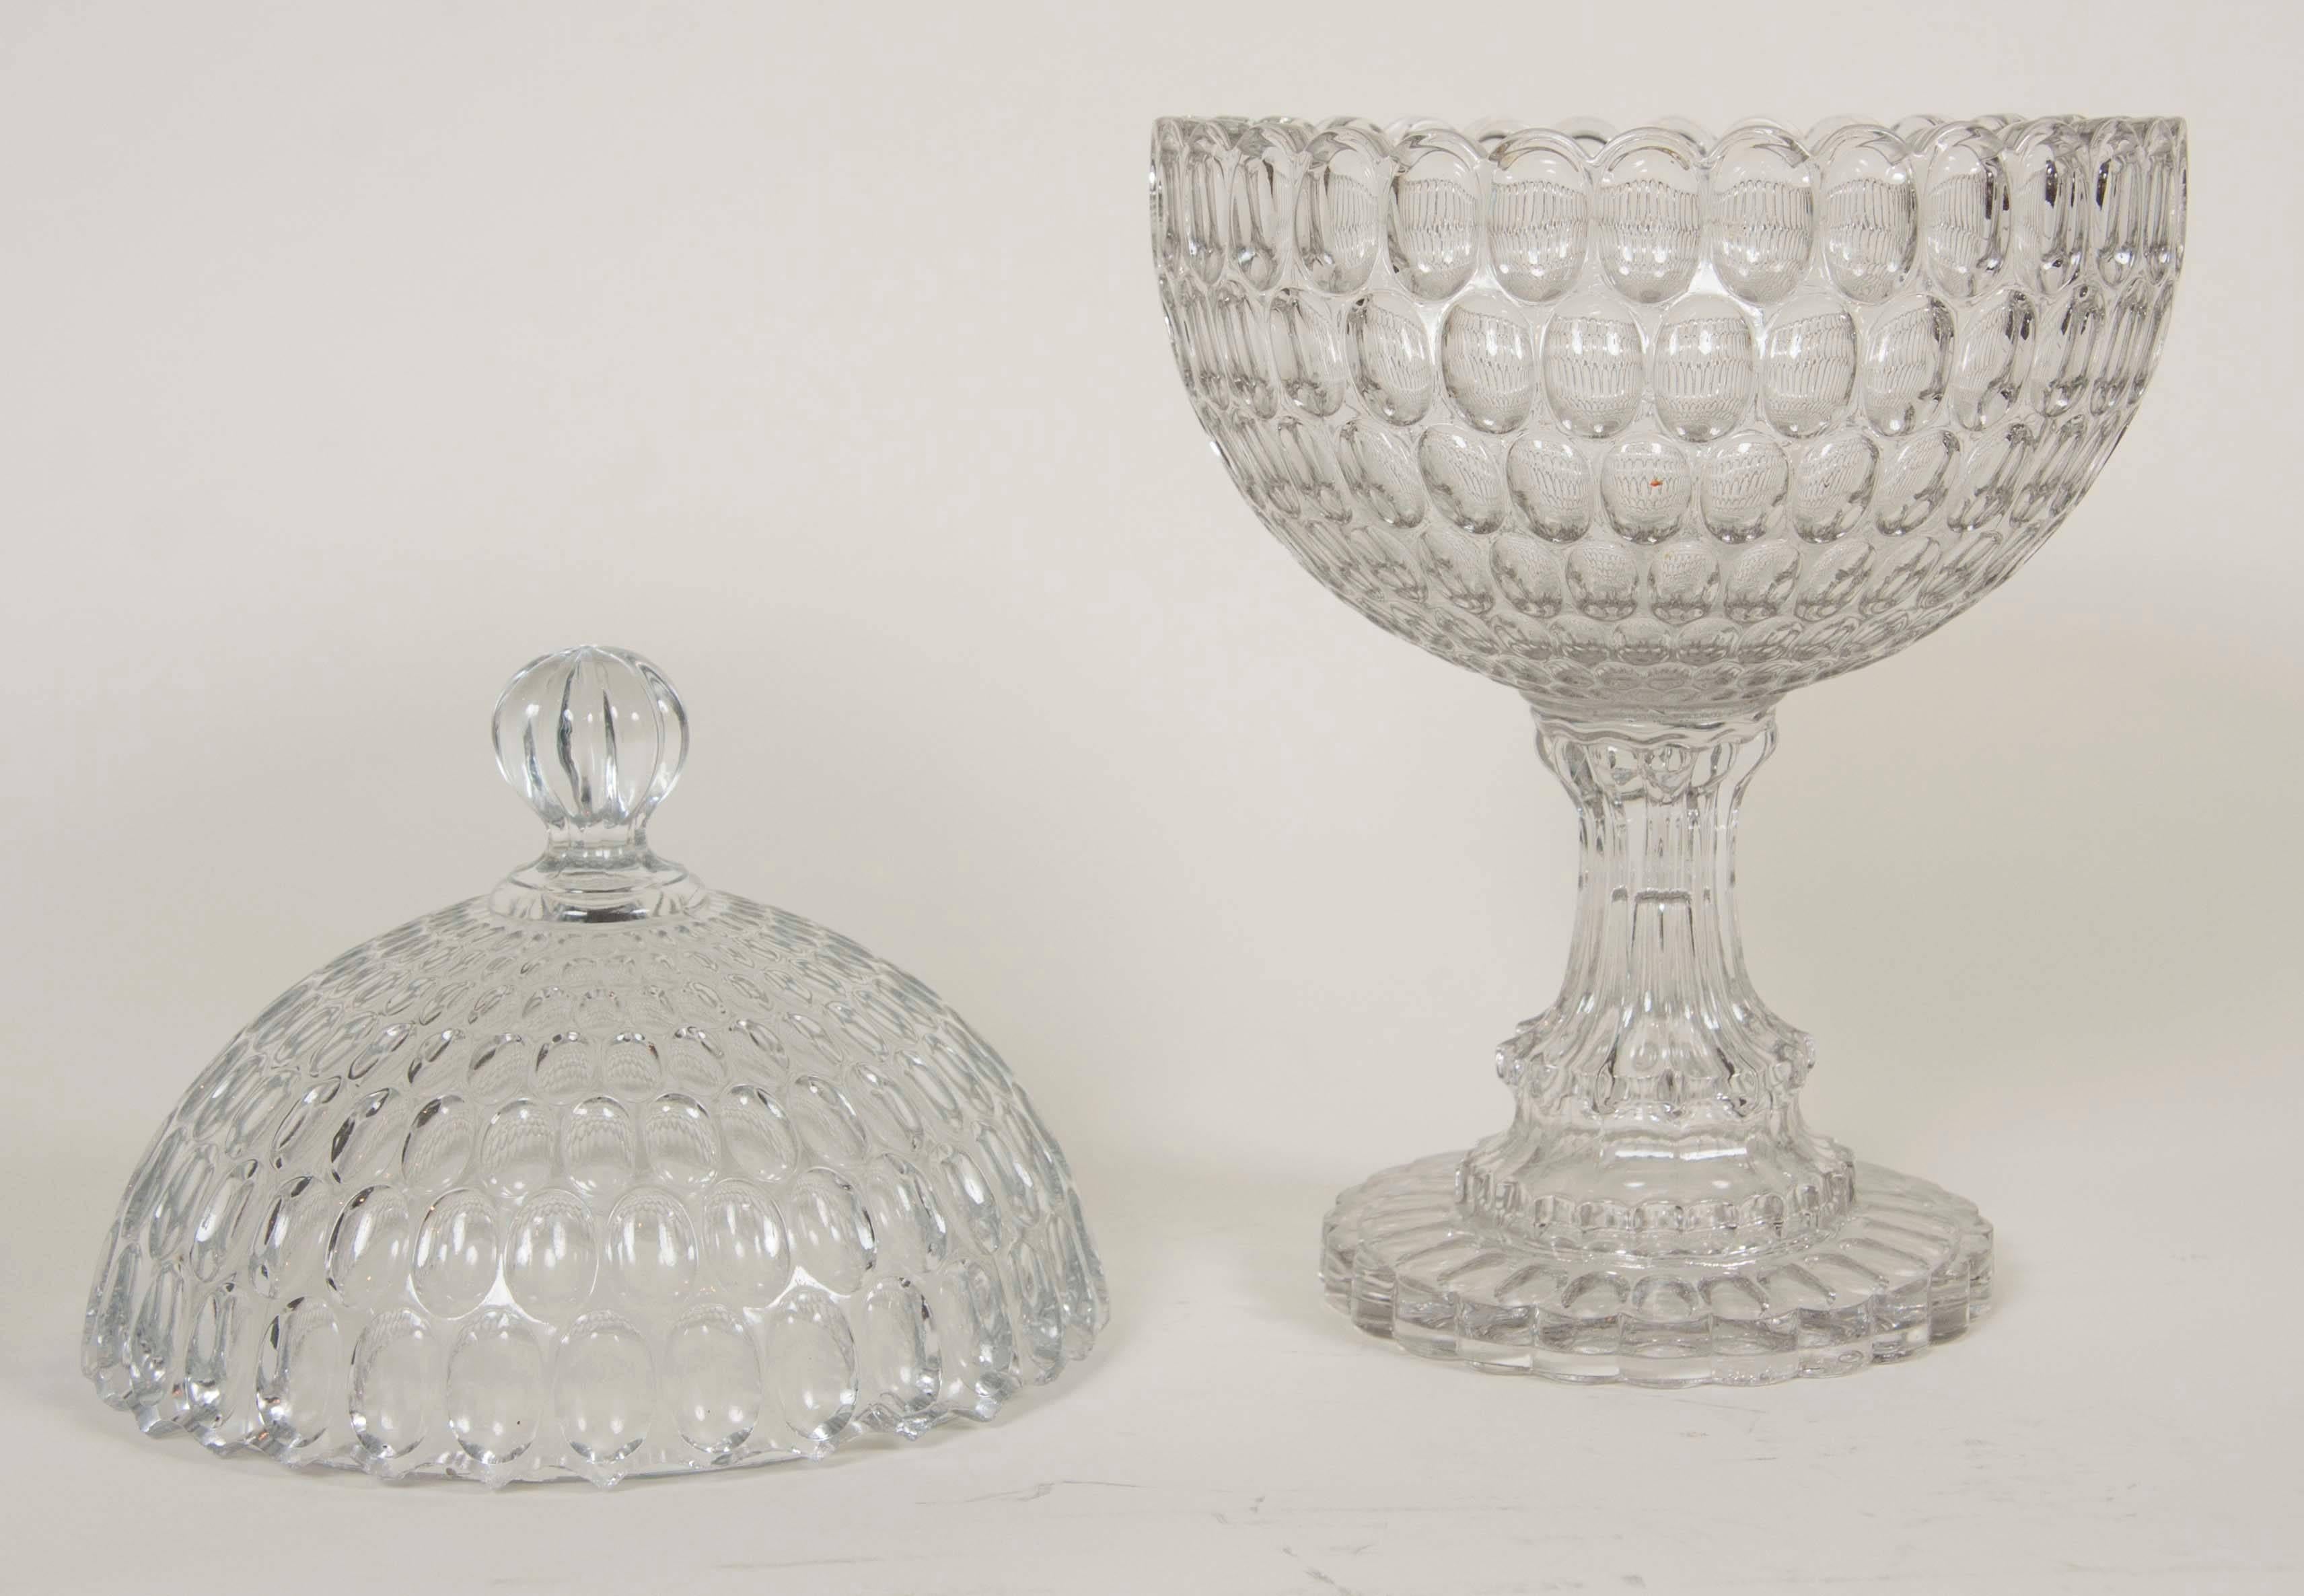 19th Century Two Thumbprint Covered Bowls on High Foot